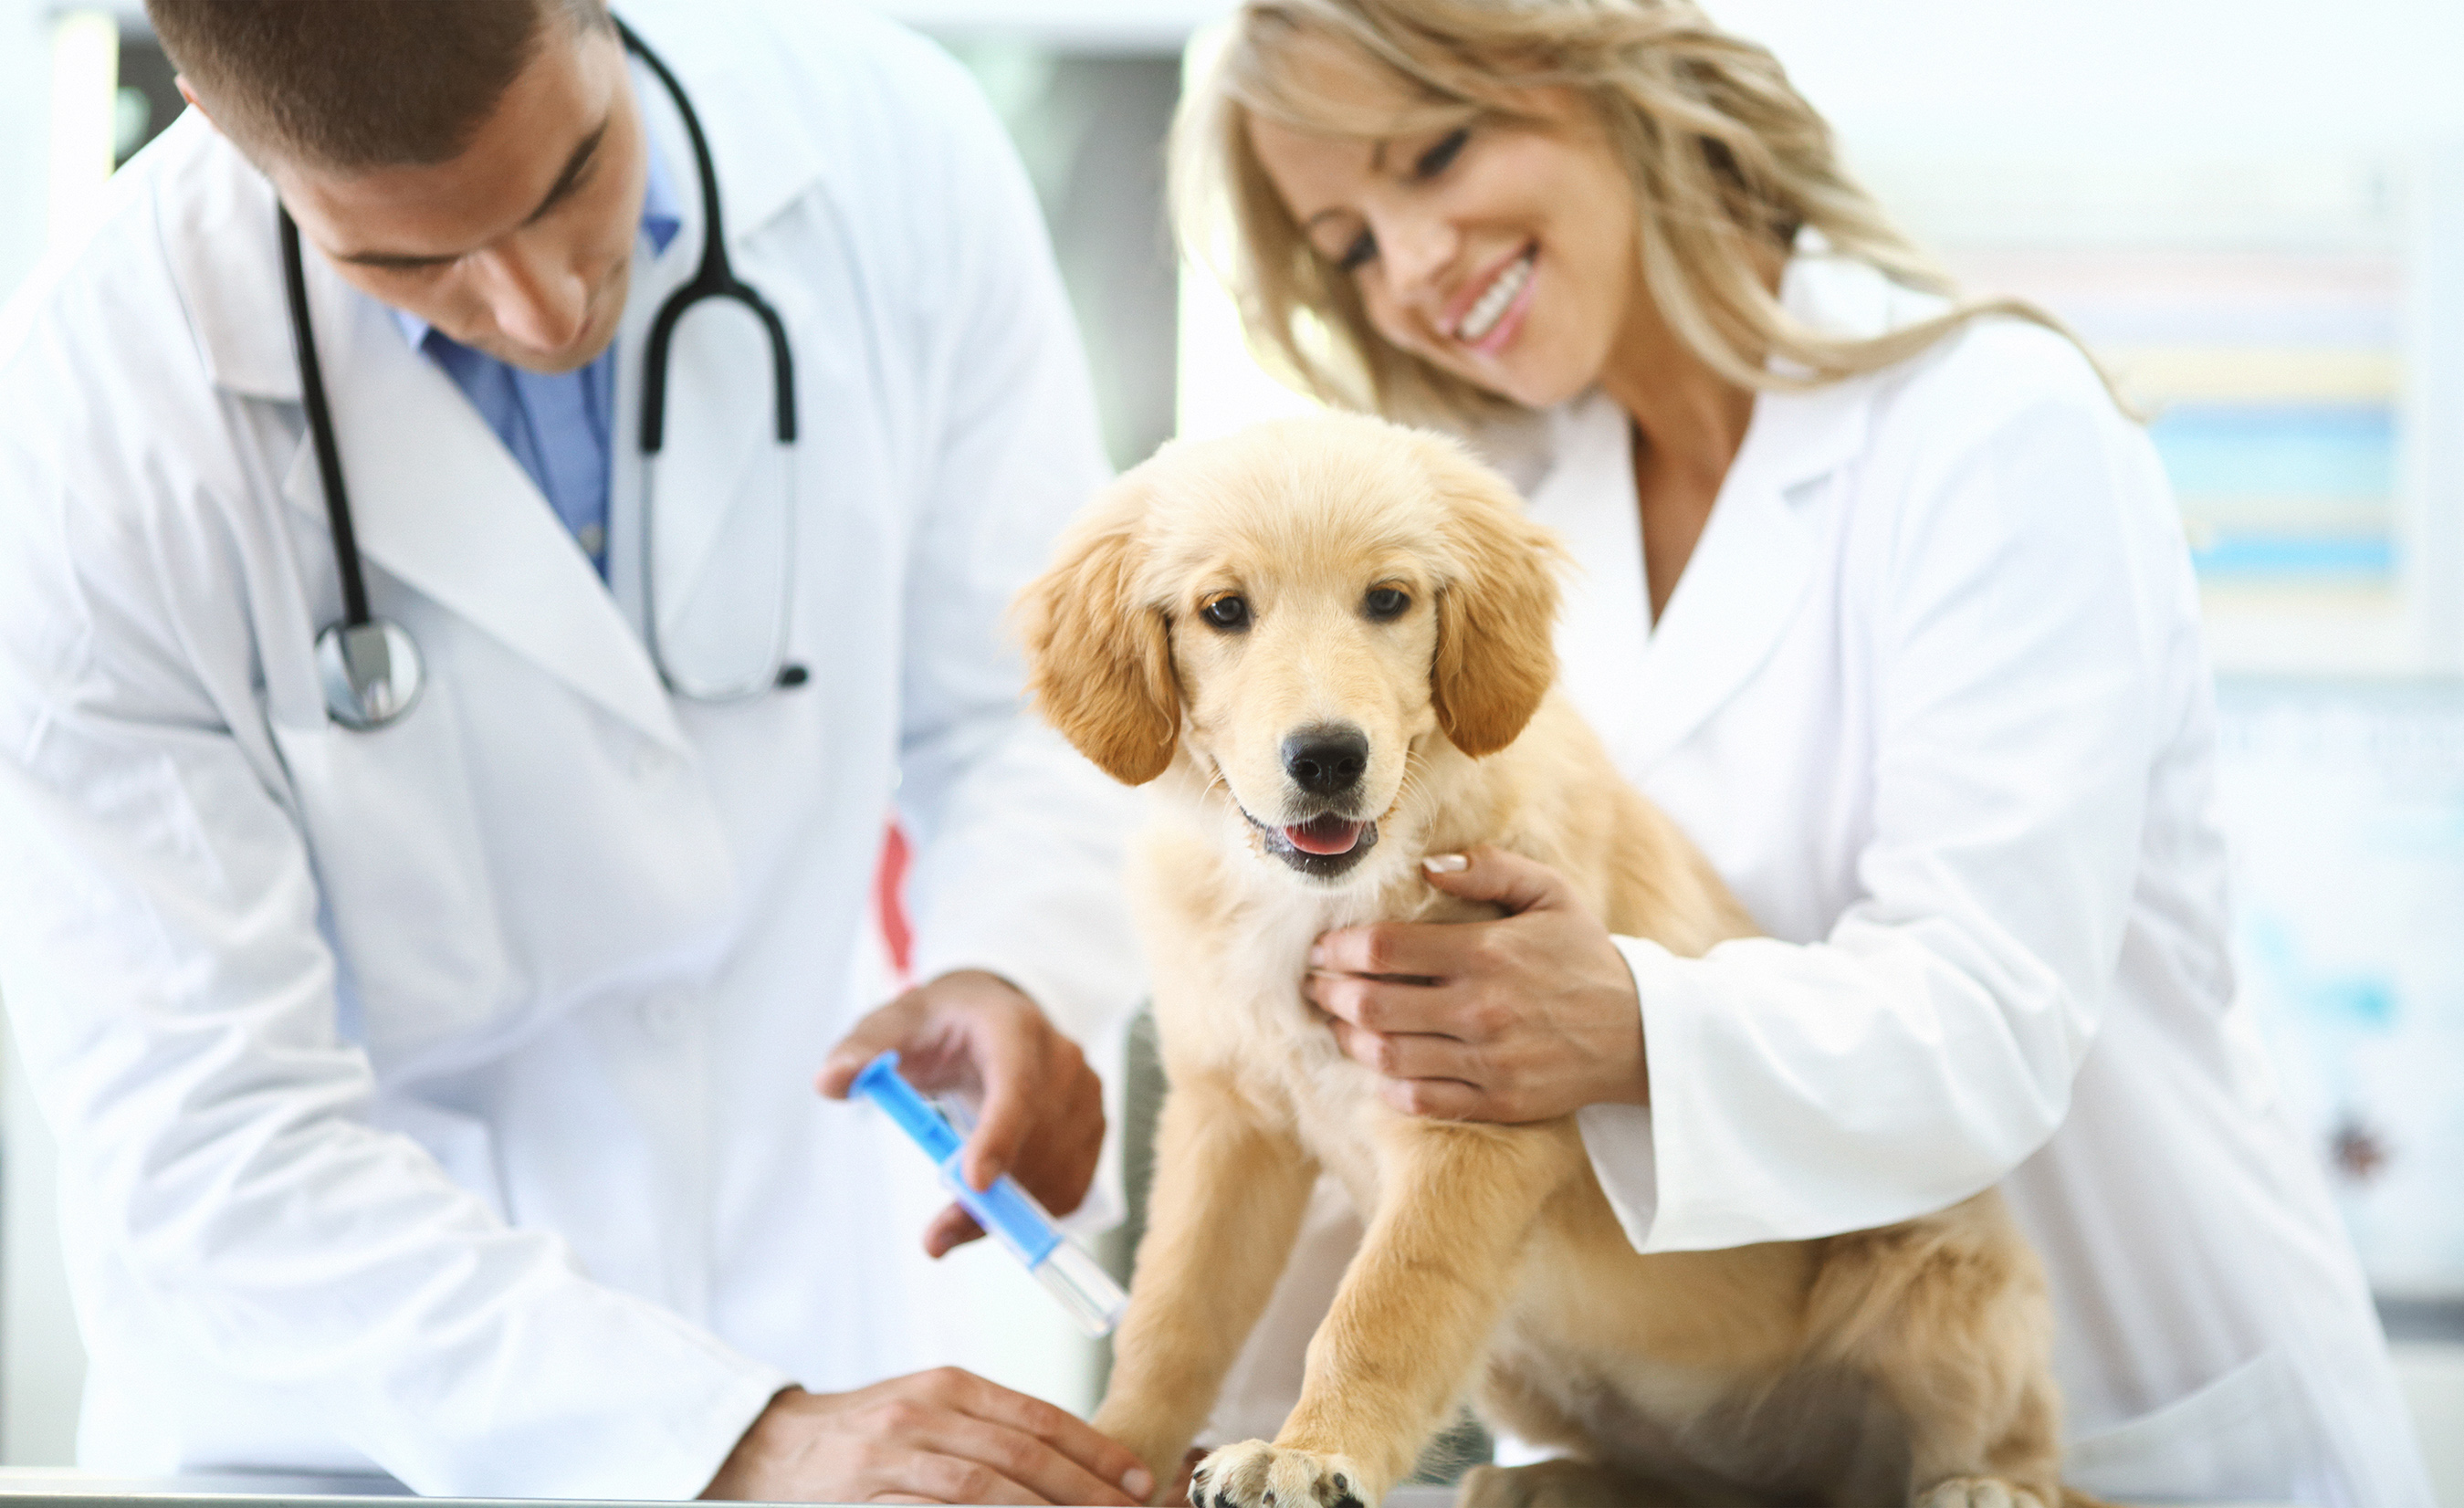 On behalf of its pet and vet financial solutions - CareCredit and Pets Best - Synchrony commissioned the “Lifetime of Care” study to help shed light on the lifetime cost associated with pet care.